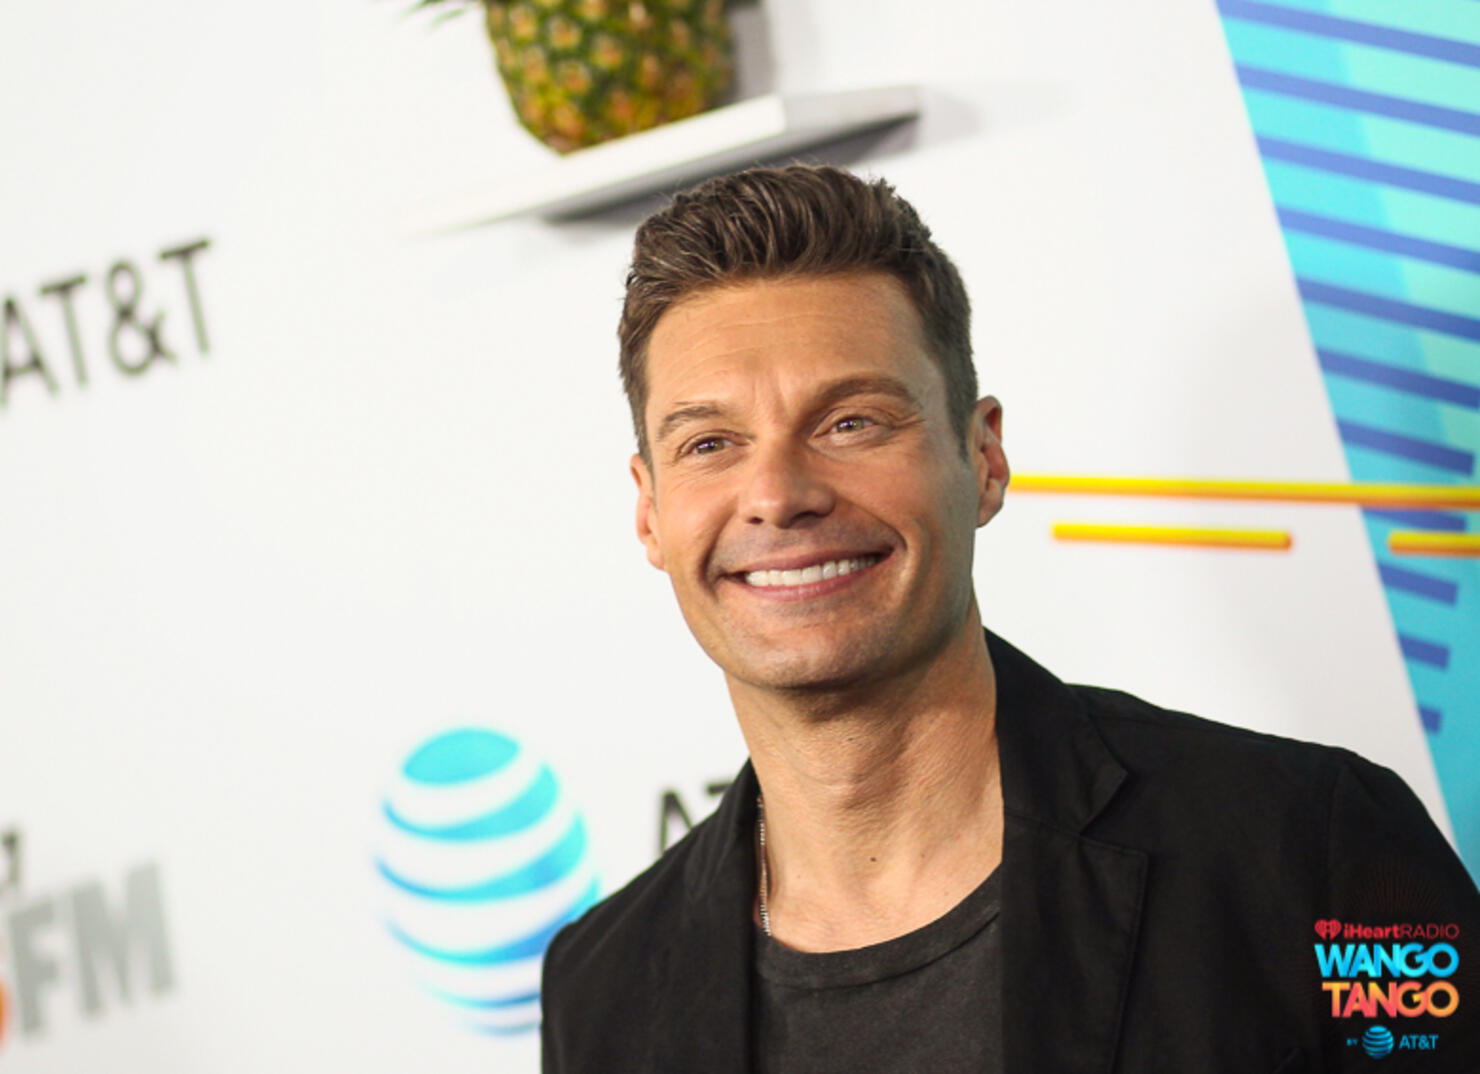 Ryan Seacrest arrives at the 2018 iHeartRadio Wango Tango by AT&T at Banc of California Stadium on June 2, 2018 in Los Angeles, California.